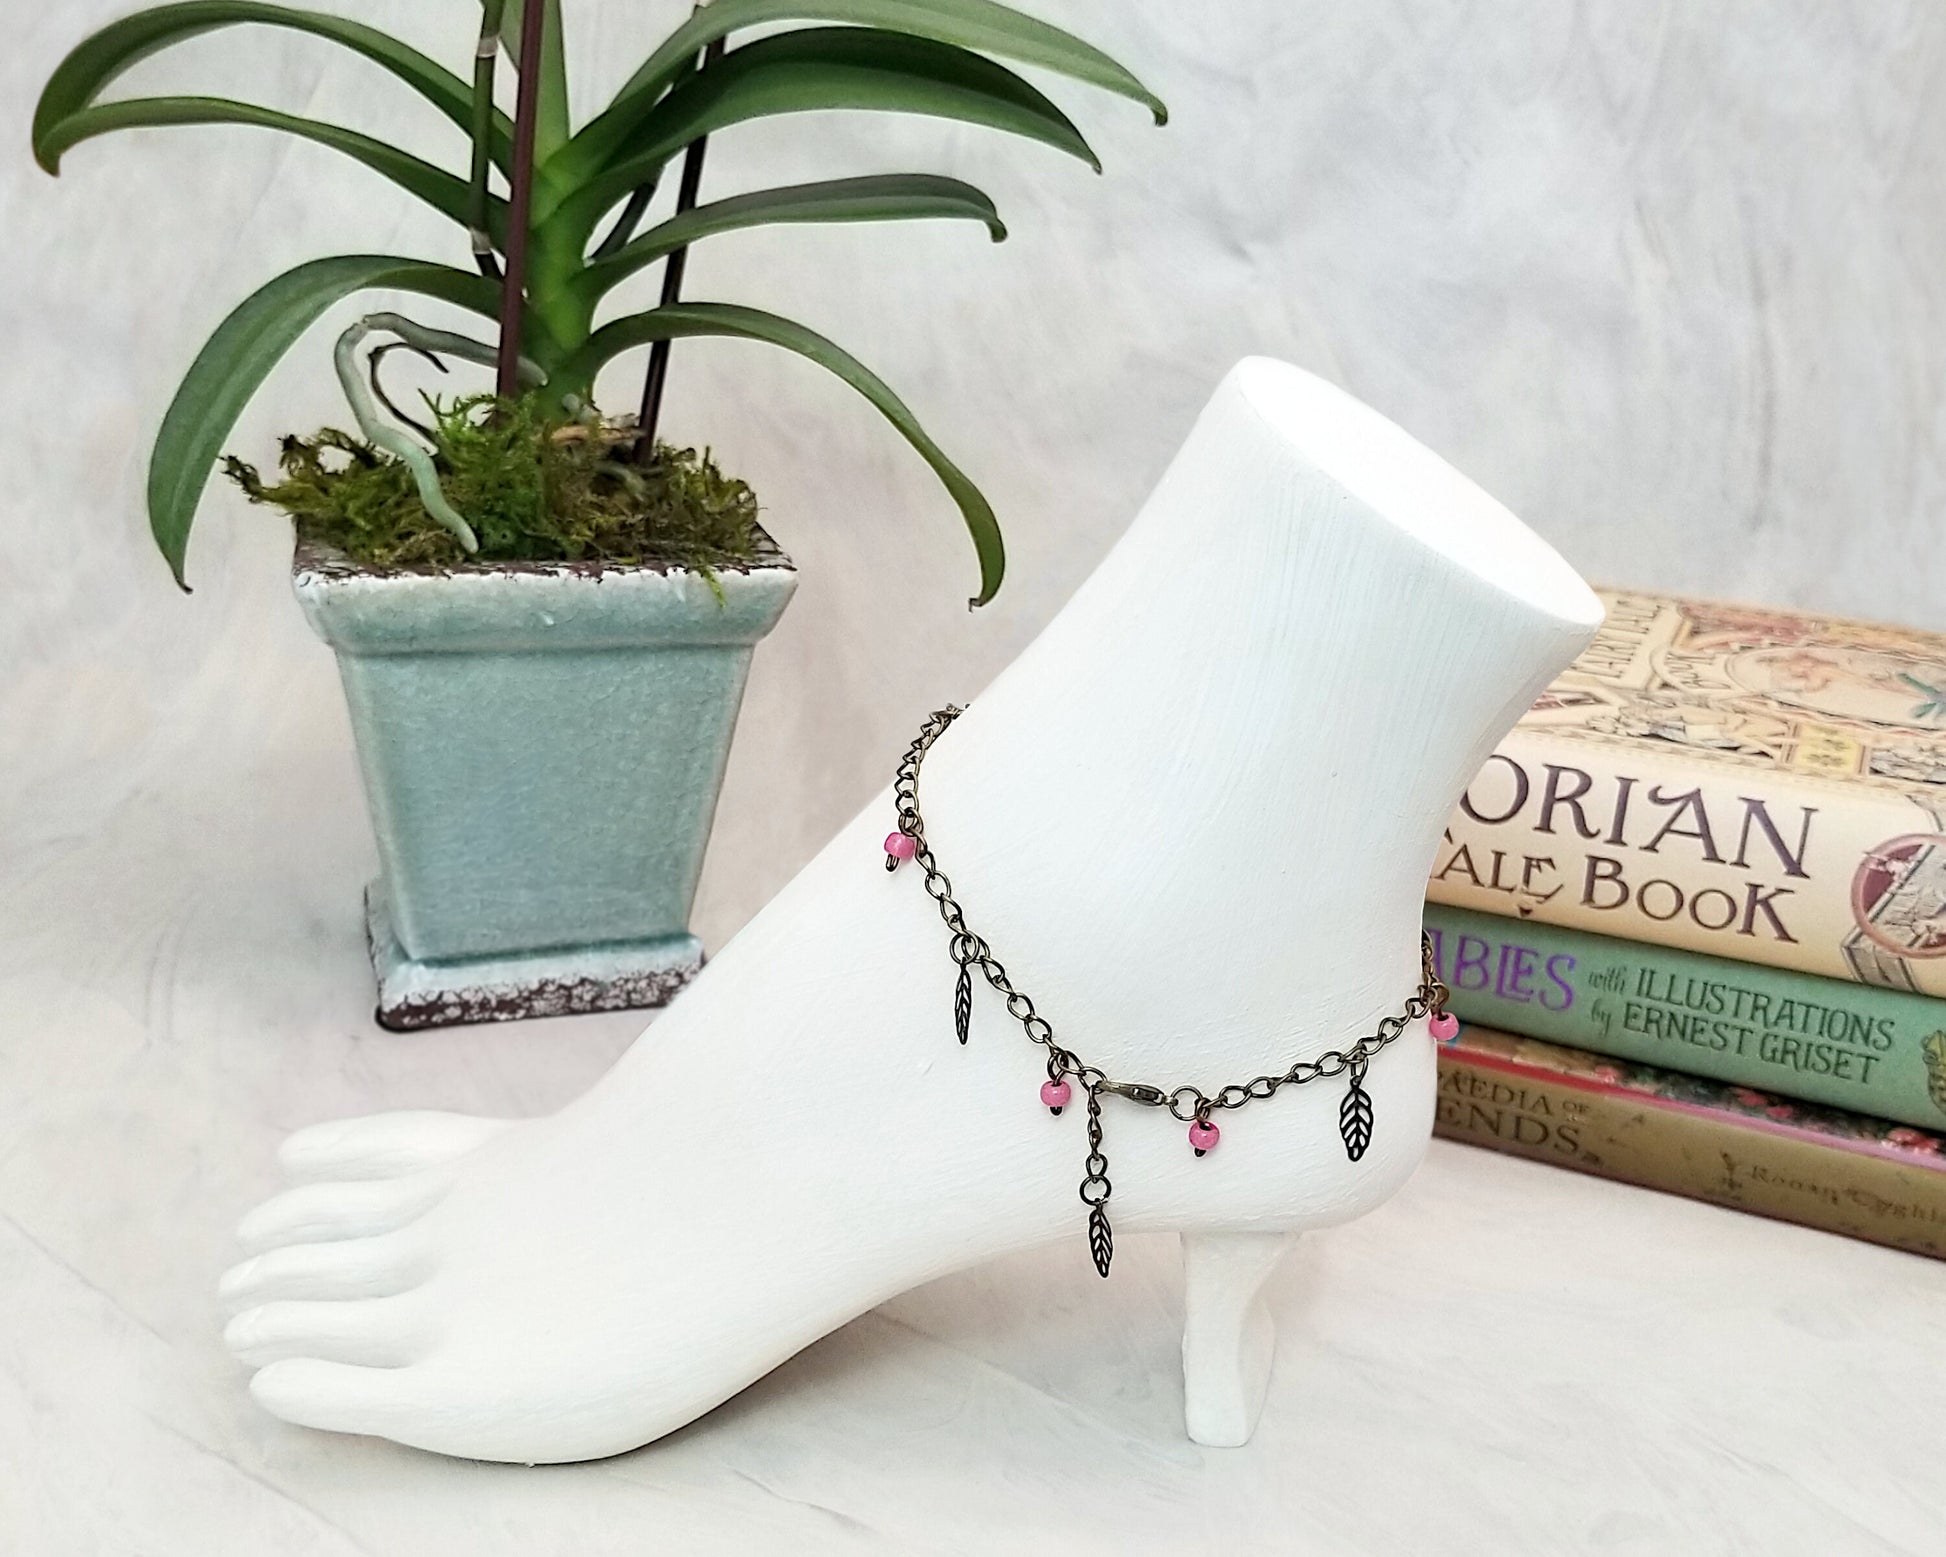 Chain Anklet or Bracelet in Pink, Adjustable, Beach, Boho, Bohemian, Gypsy, Steampunk, Choice of Colors and Metals